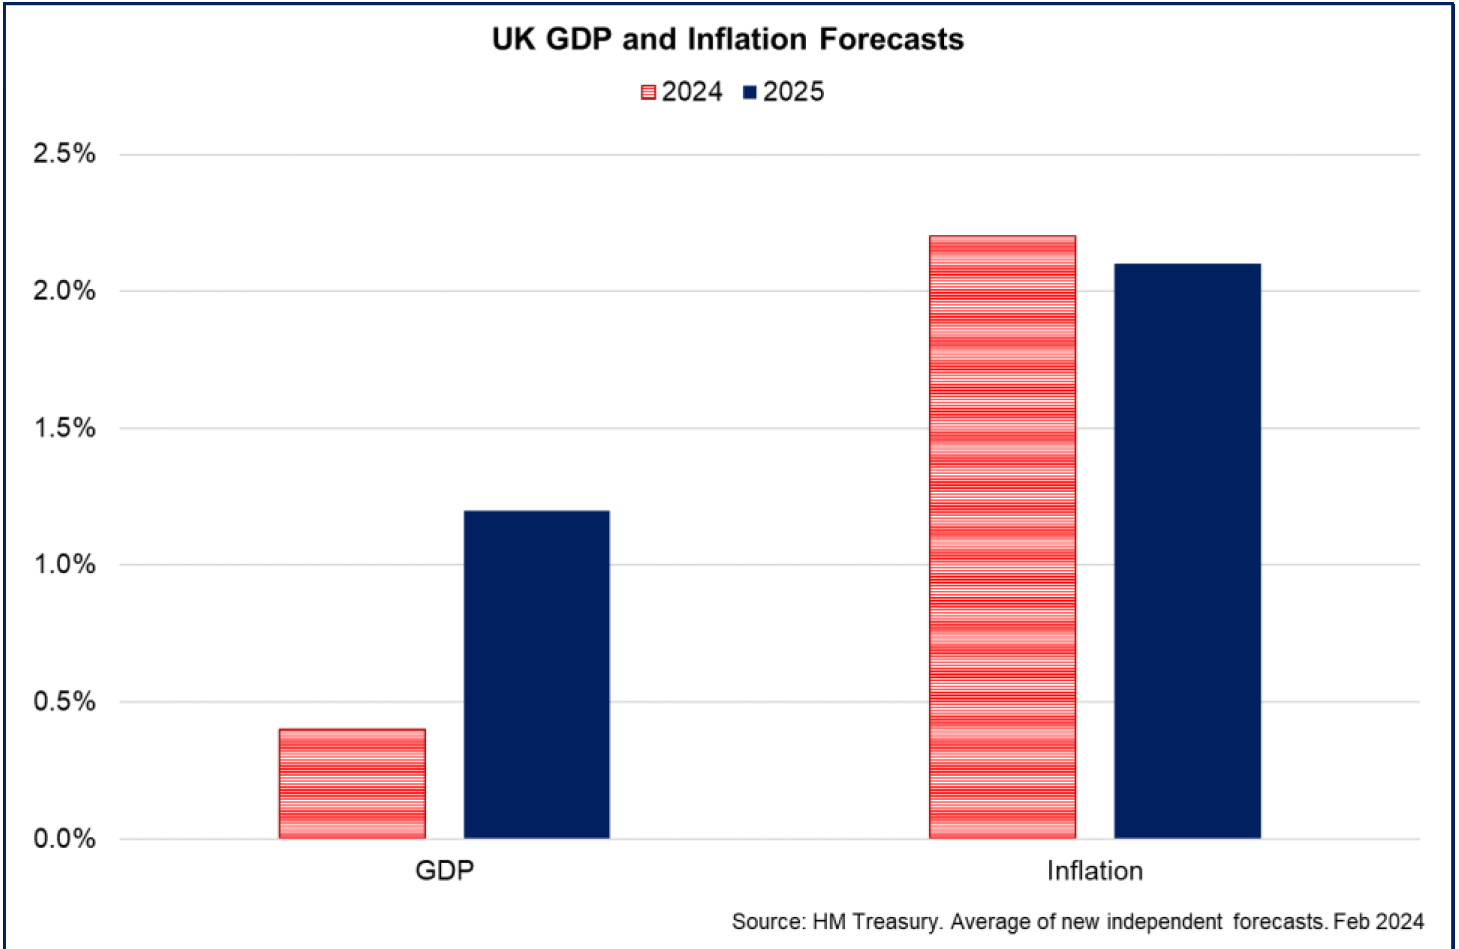 UK GDP growth is forecast to strengthen in 2024 and 2025 while the inflation rate is forecast to fall